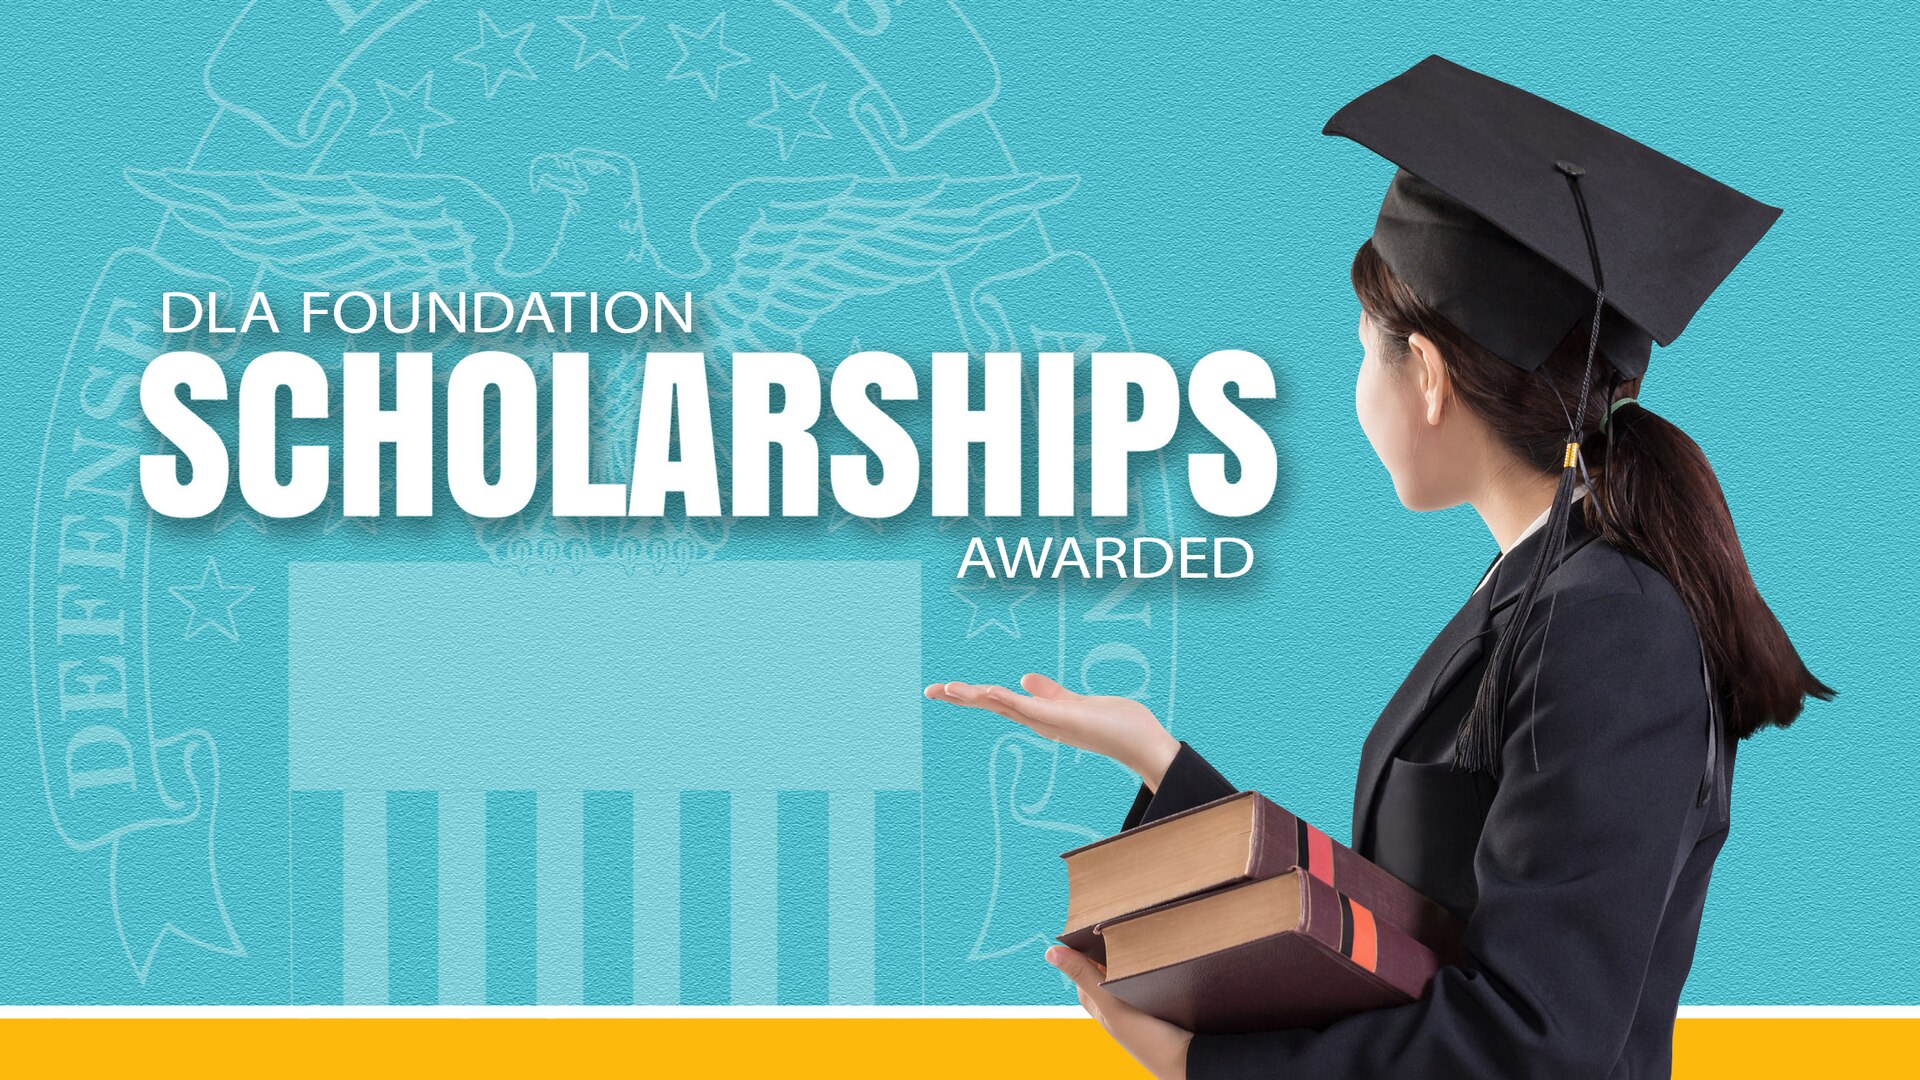 College person with cap and gown in front of light blue background and text DLA Foundation Scholarships Awarded